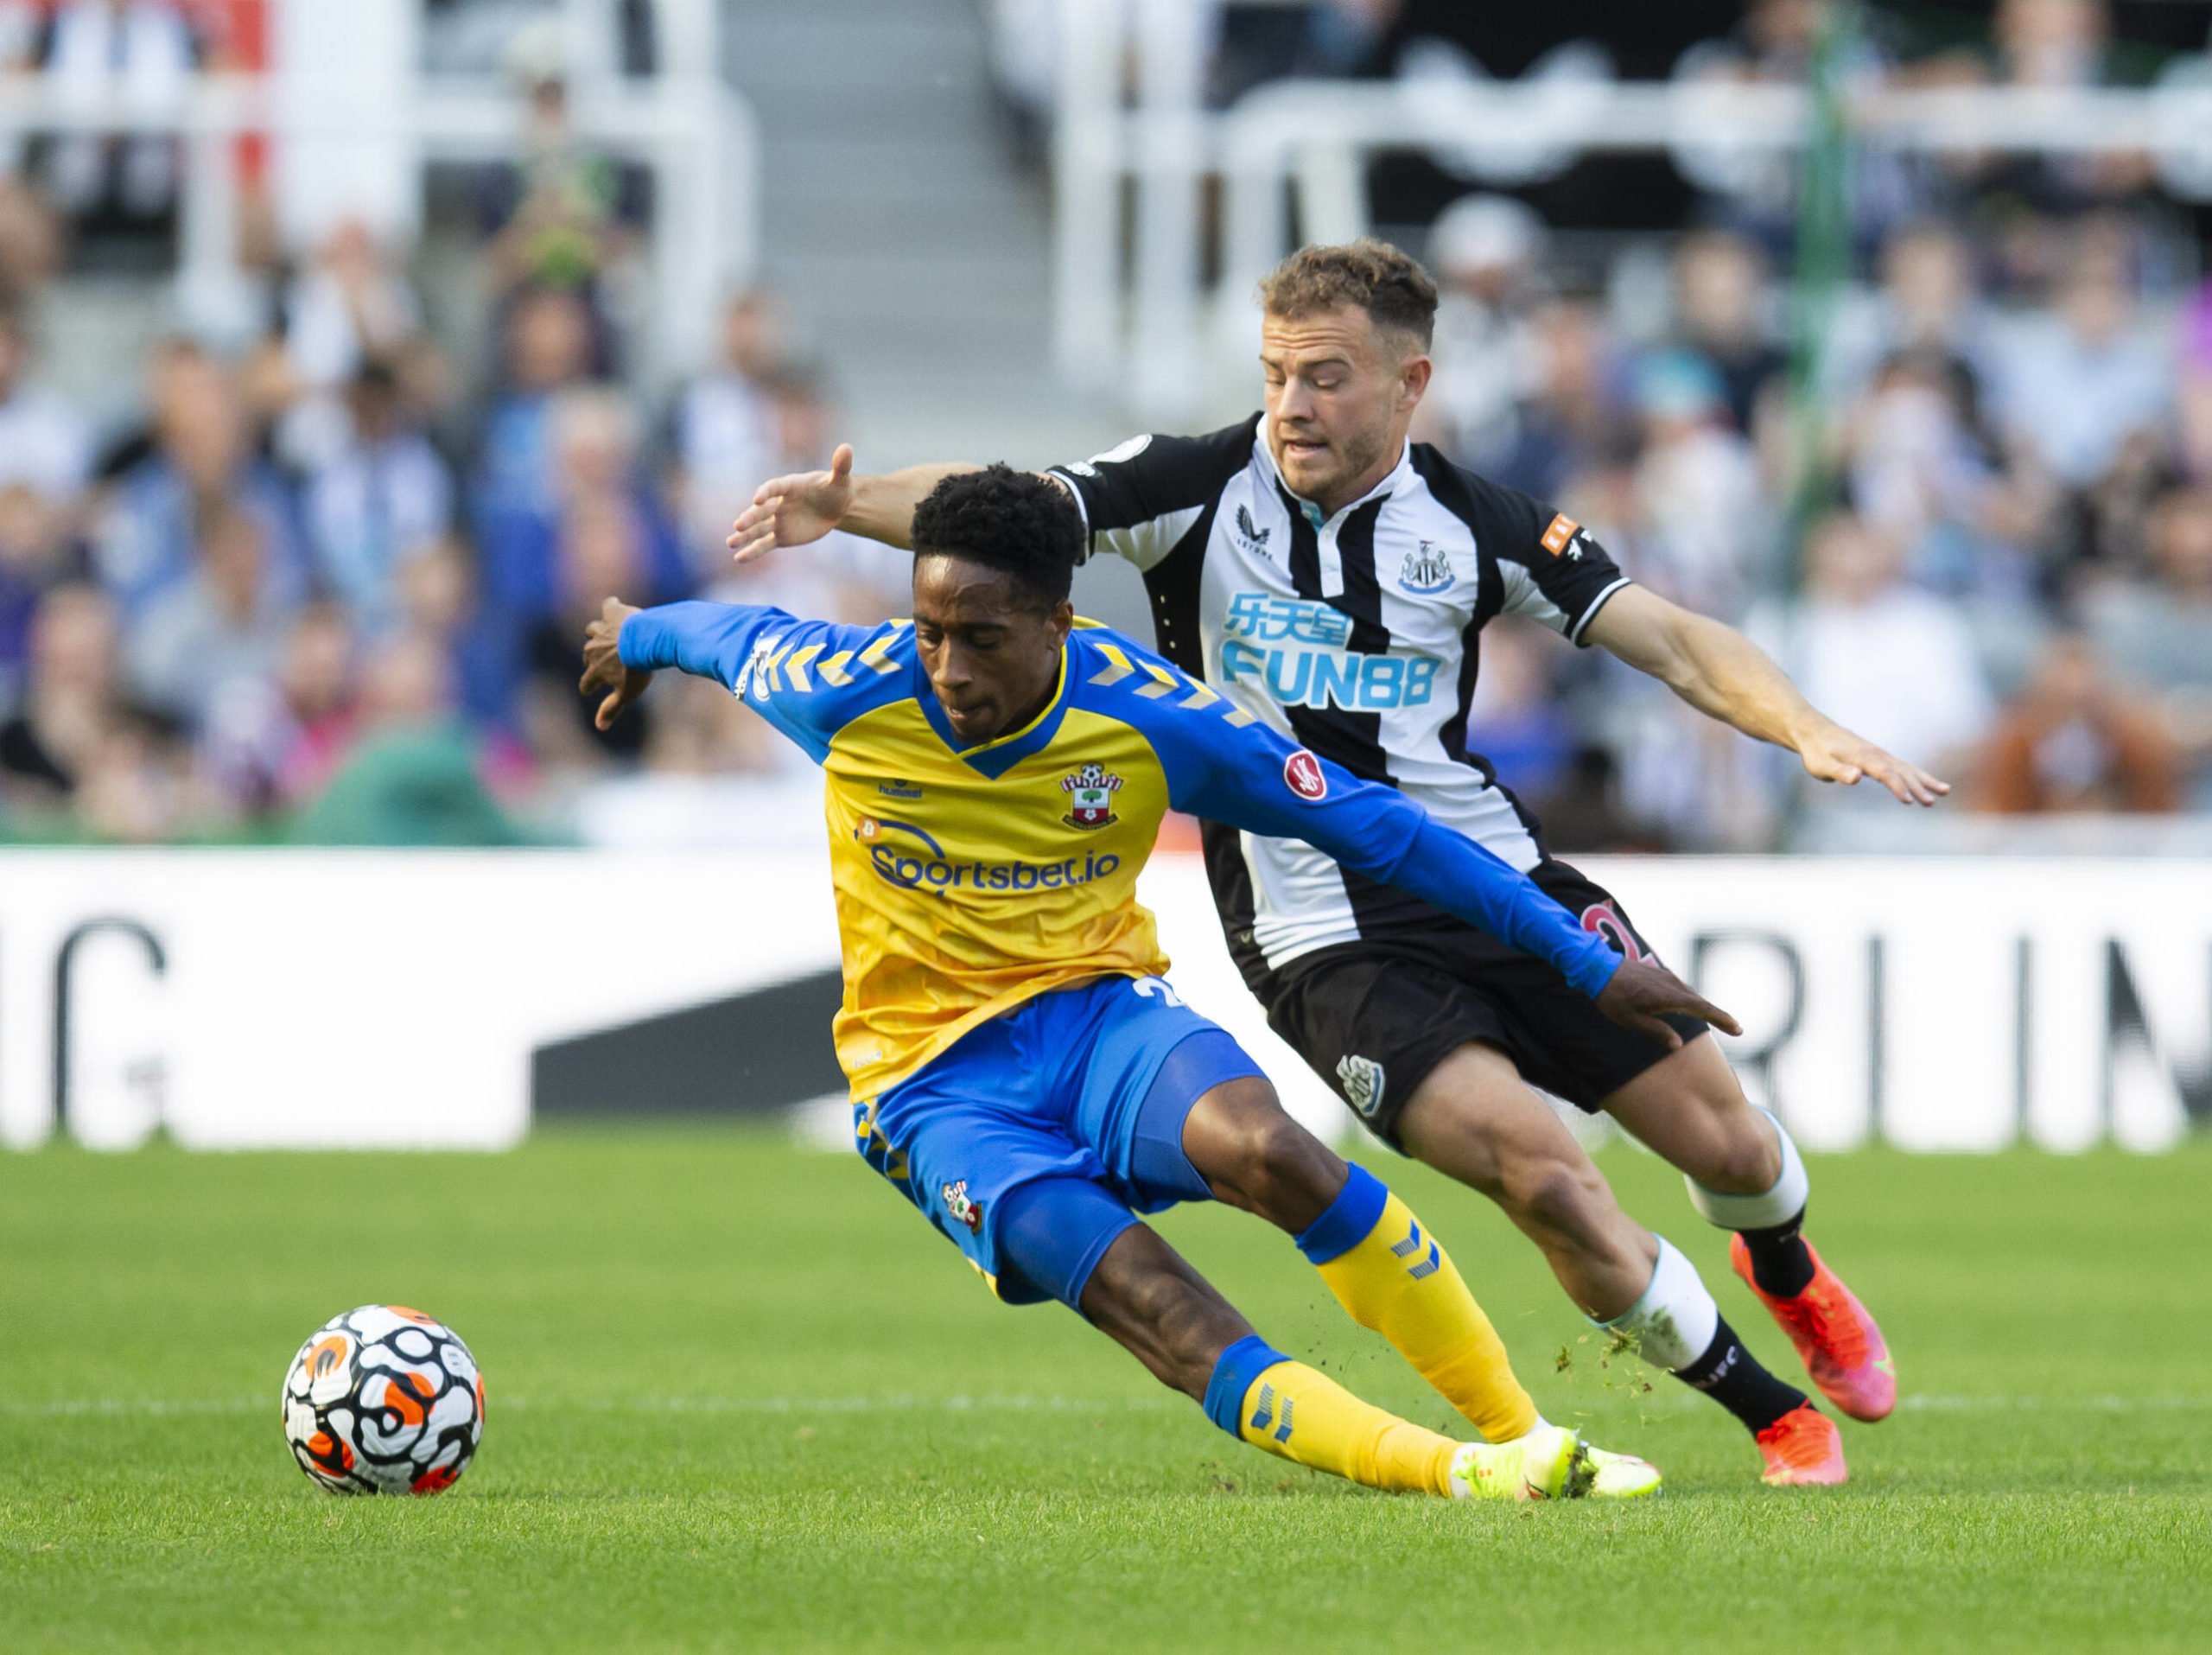 Everton made an enquiry for Walker-Peters last month (Walker-Peters is seen in the picture)